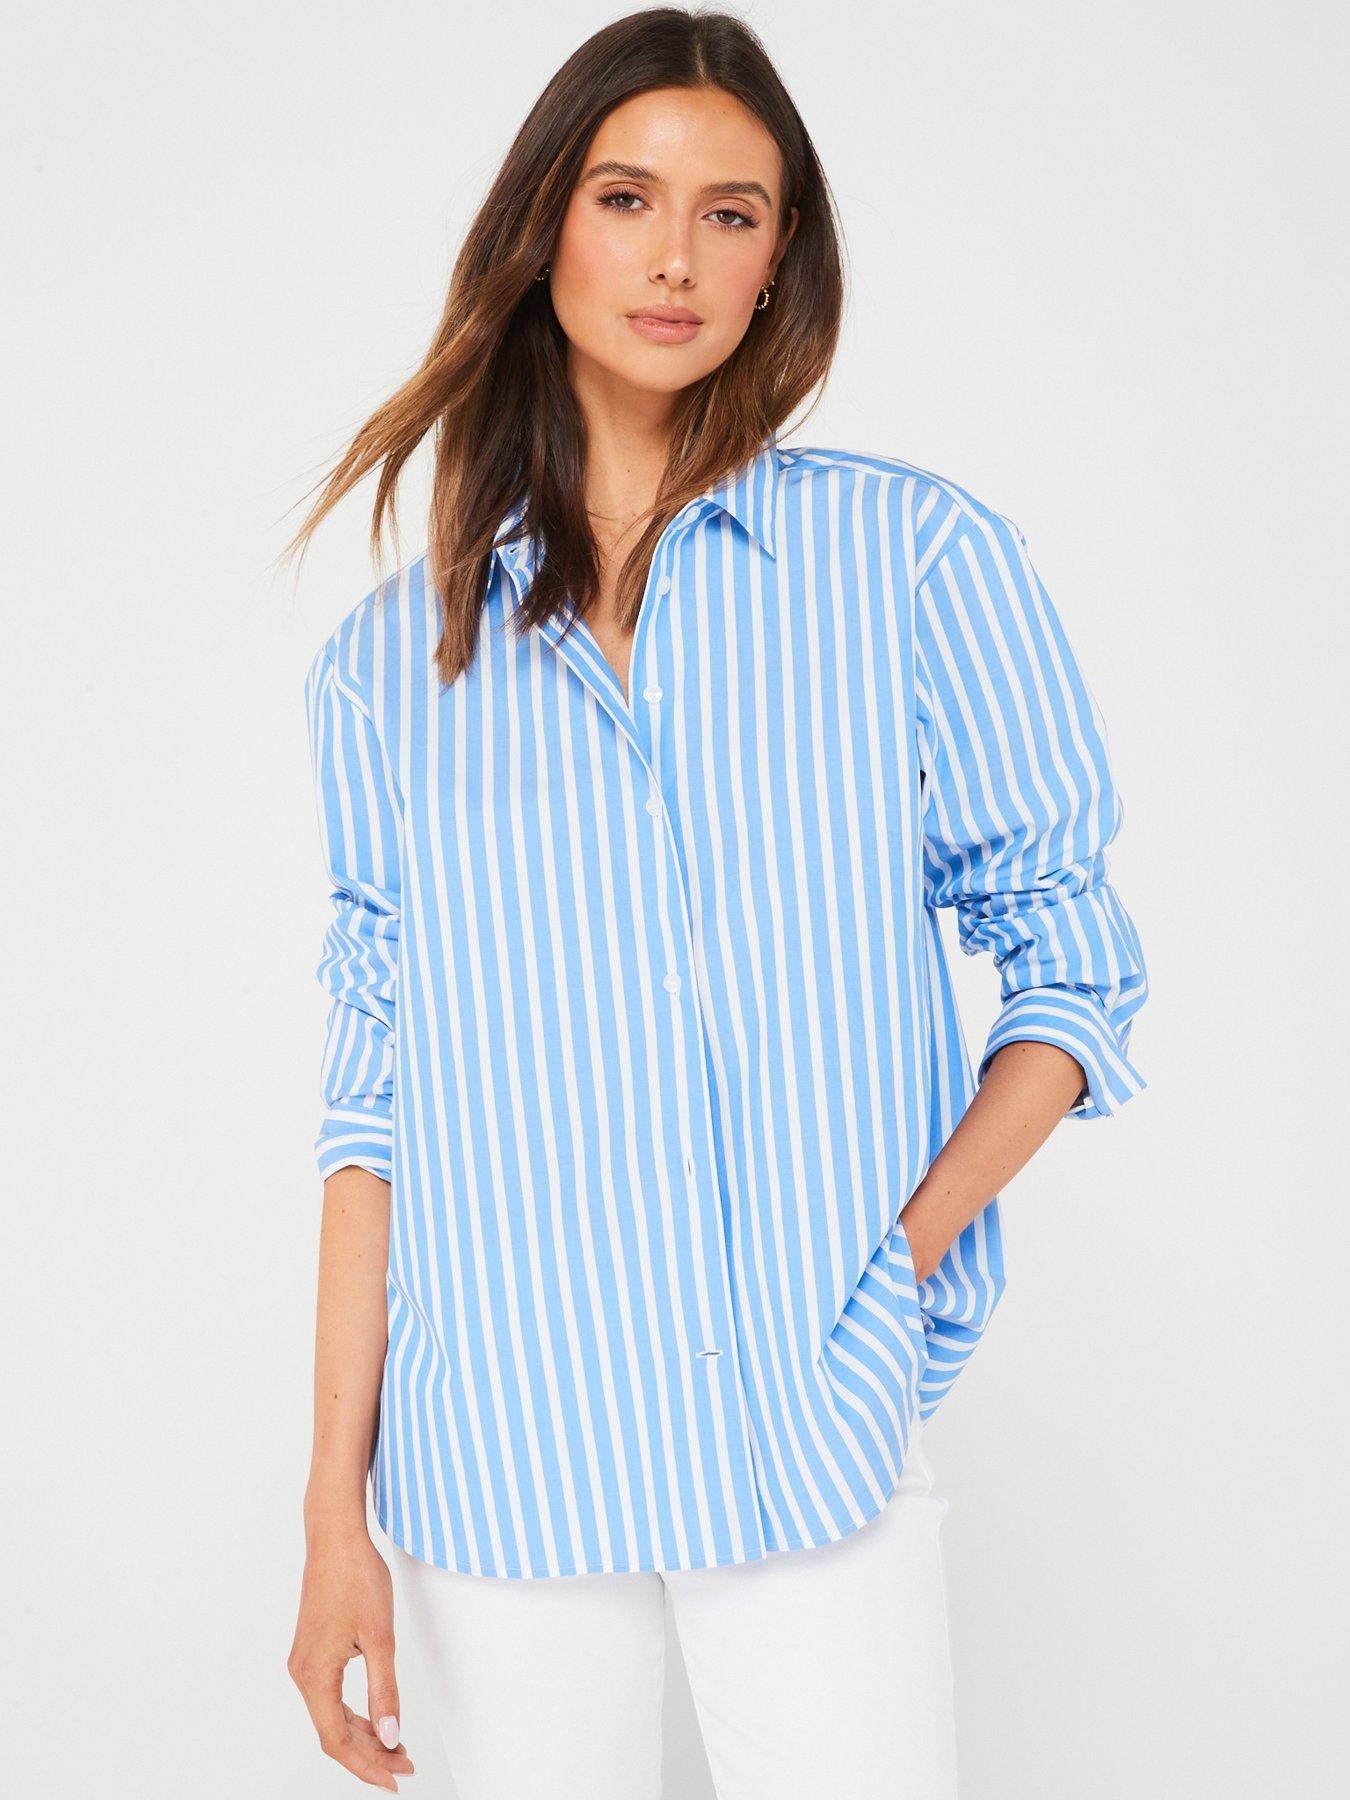 Women's Shirts, Free Delivery